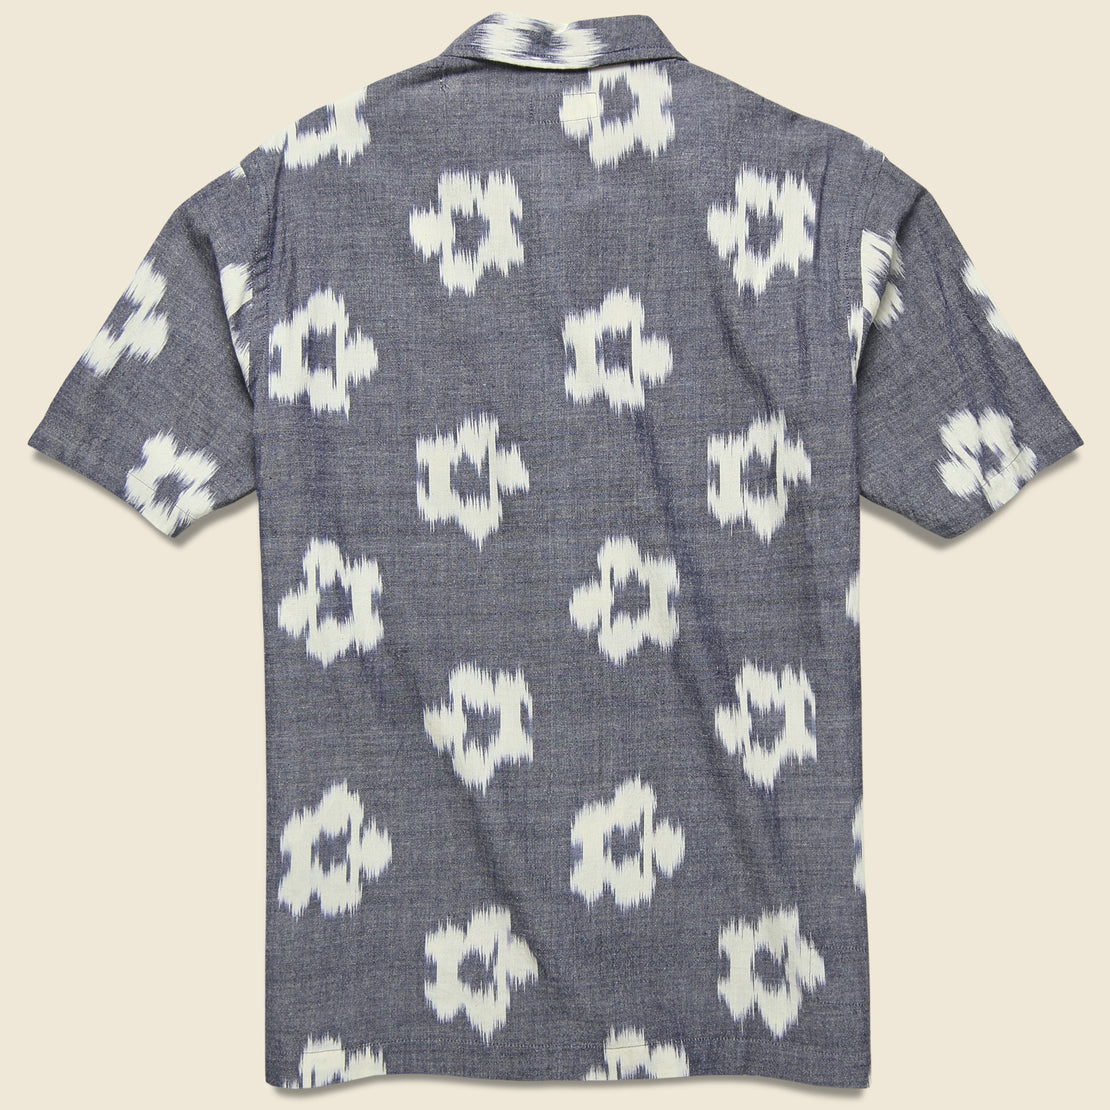 Road Shirt - Grey Ikat Flower - Universal Works - STAG Provisions - Tops - S/S Woven - Floral